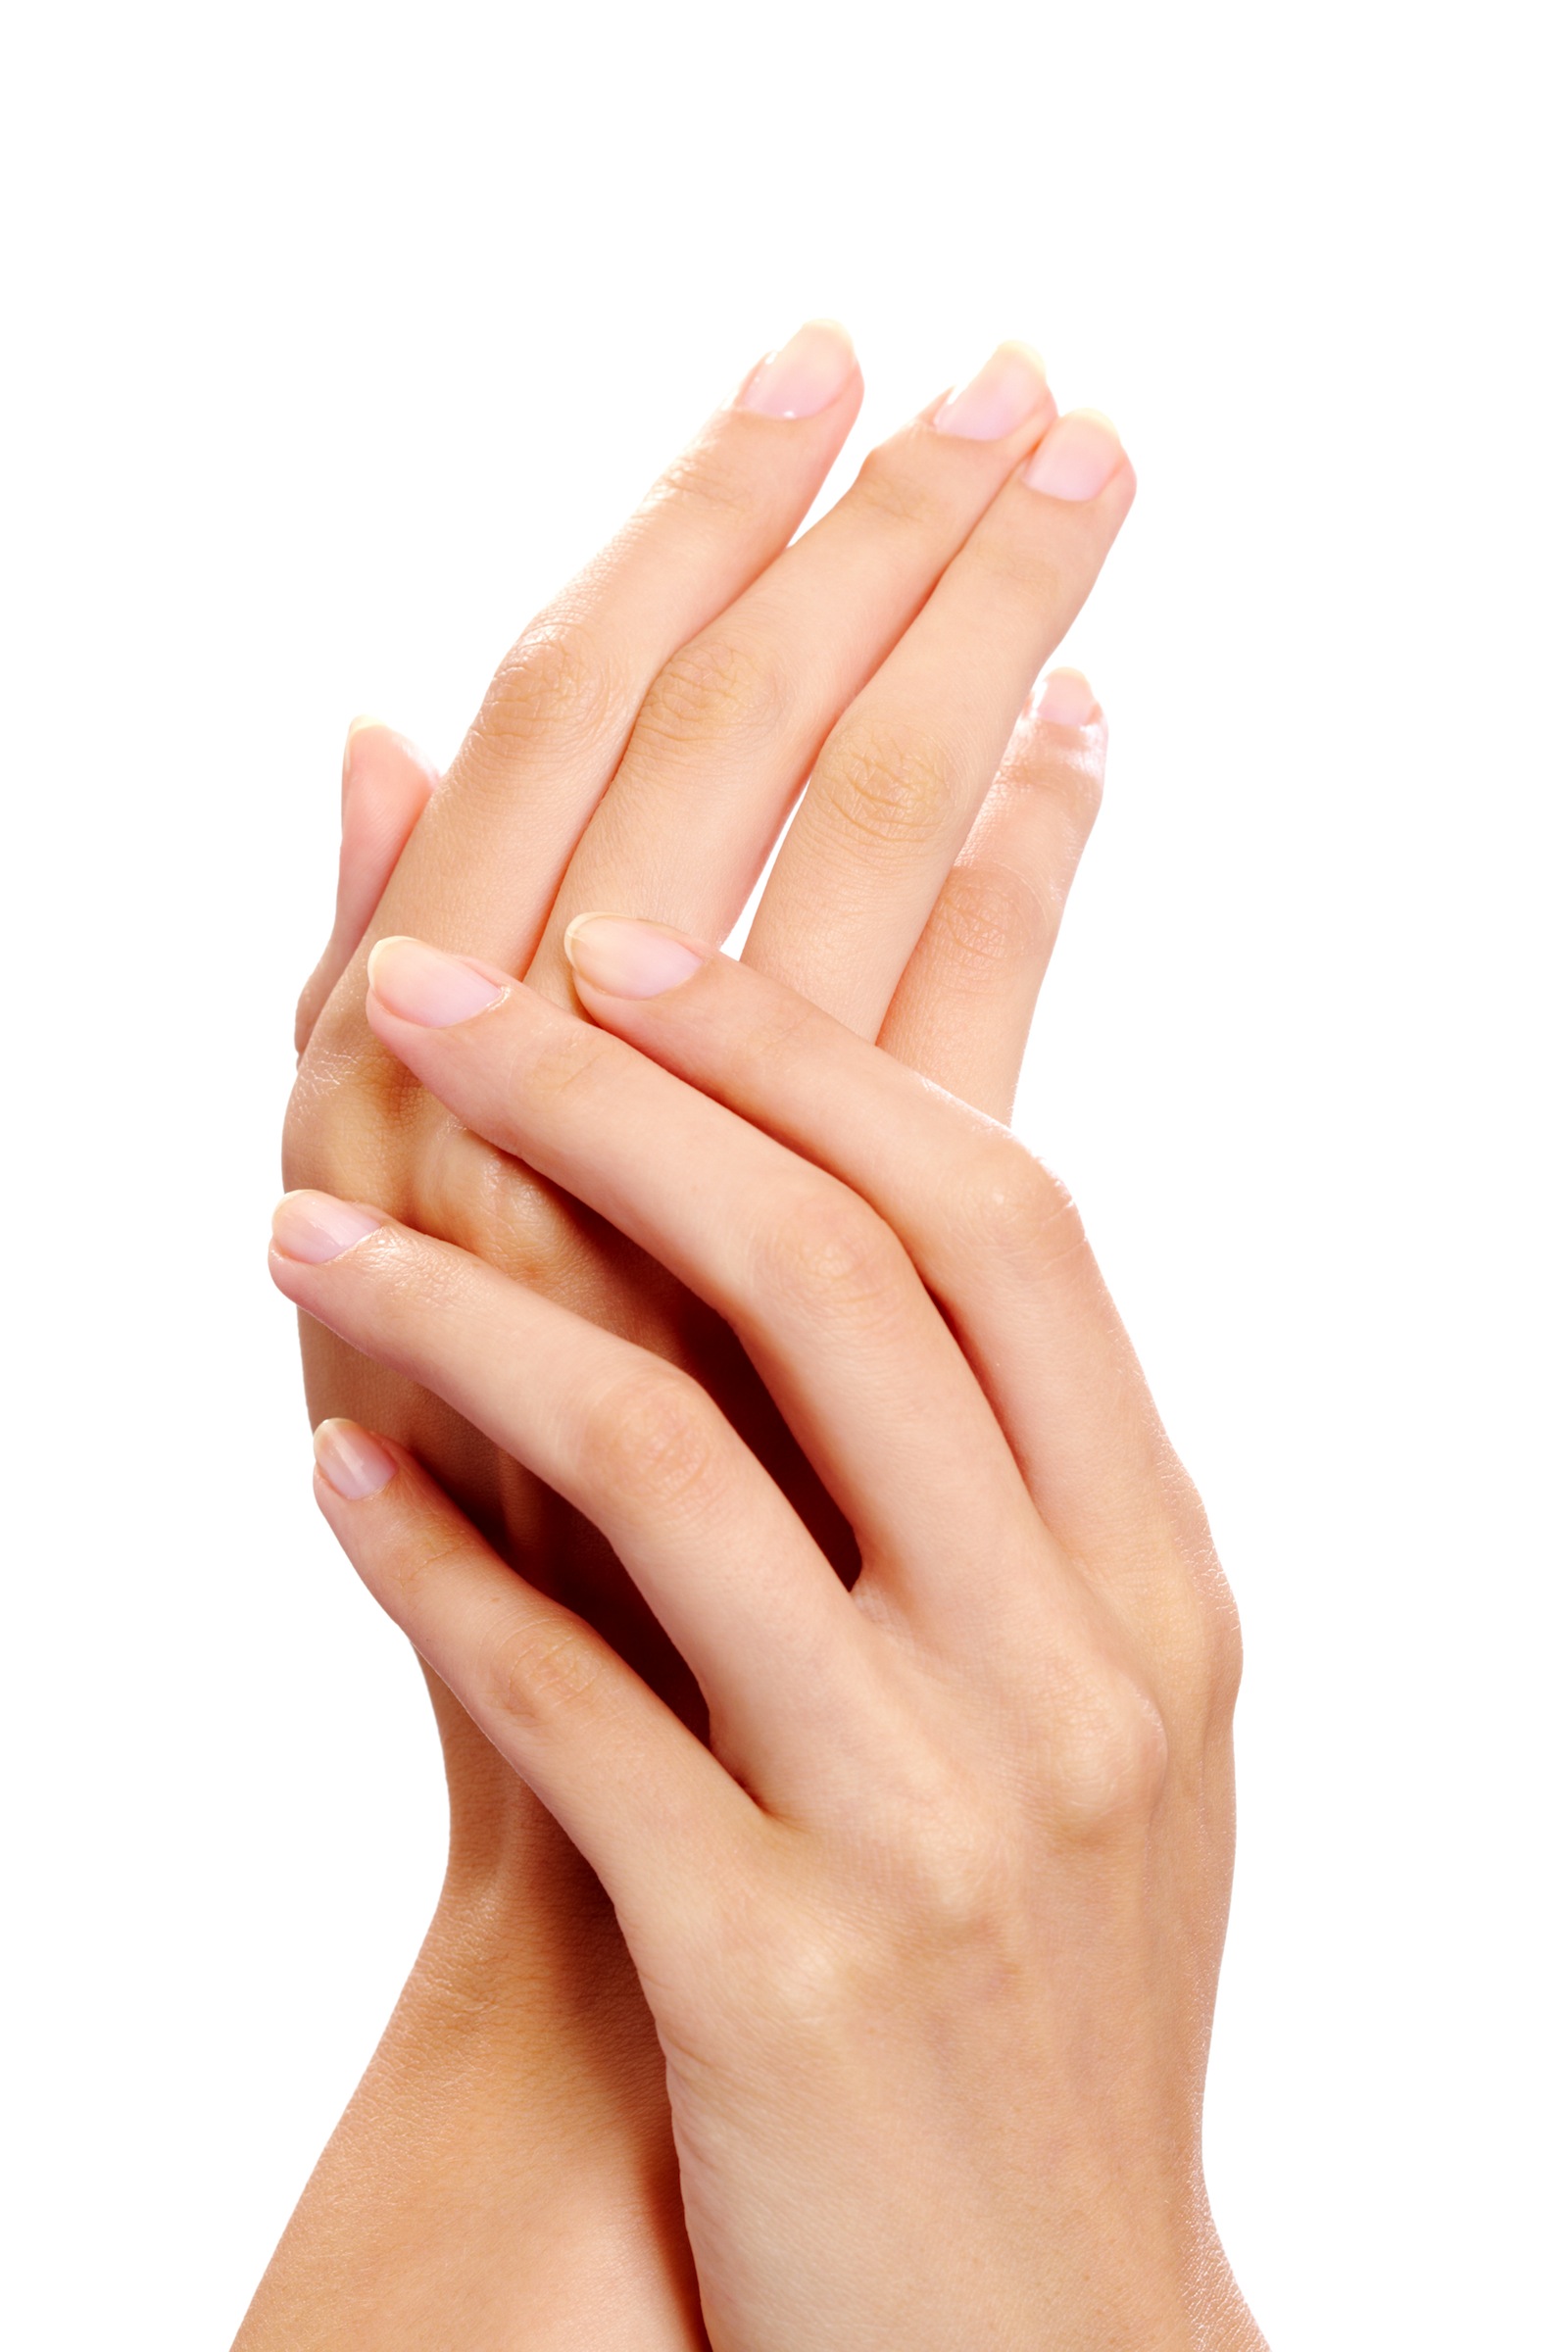 How to Rejuvenate the Aging Hands of Time - American CryoStem